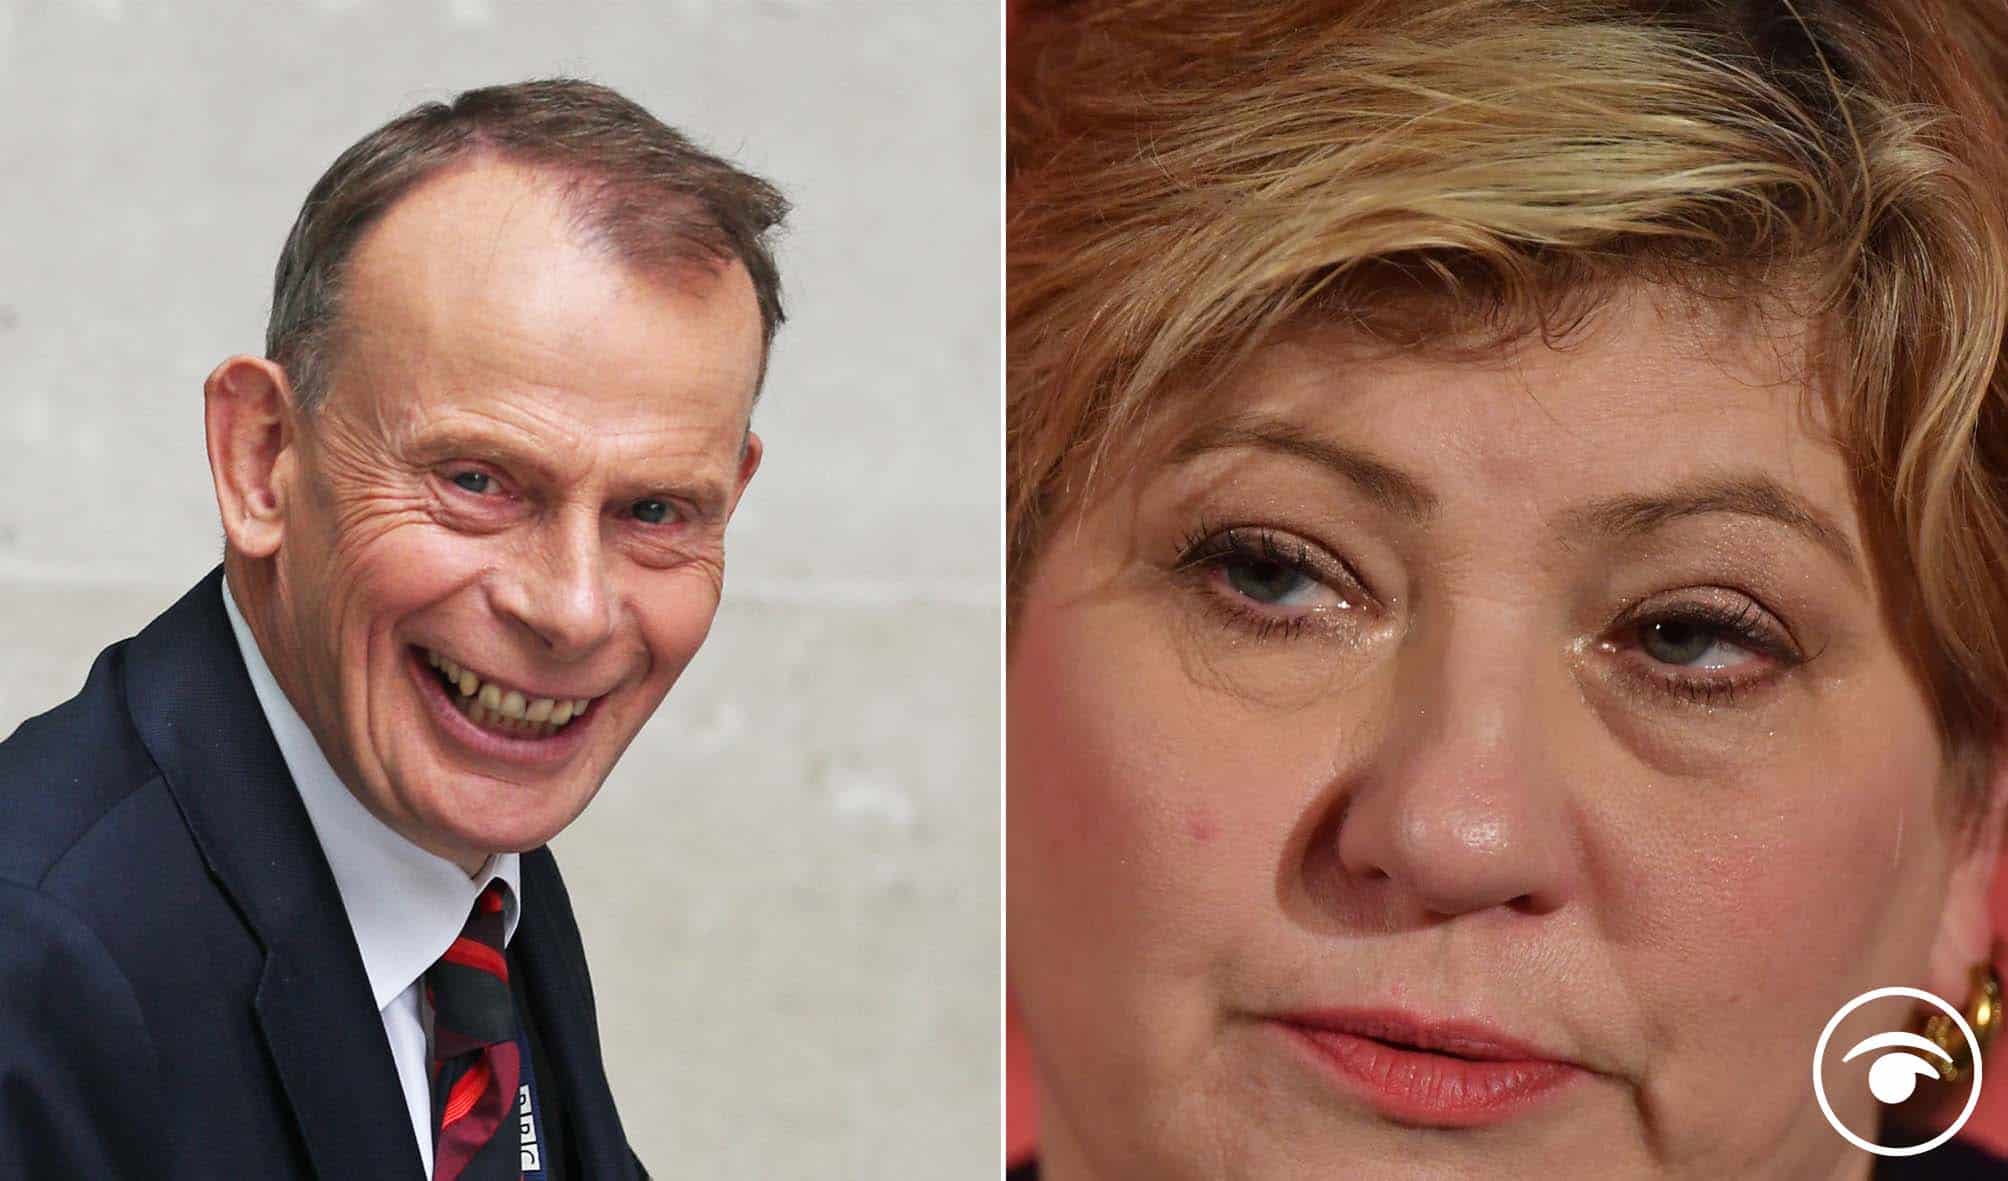 Watch: Marr criticised for appearing to shut down Emily Thornberry as she slams Govt’s handling of energy crisis